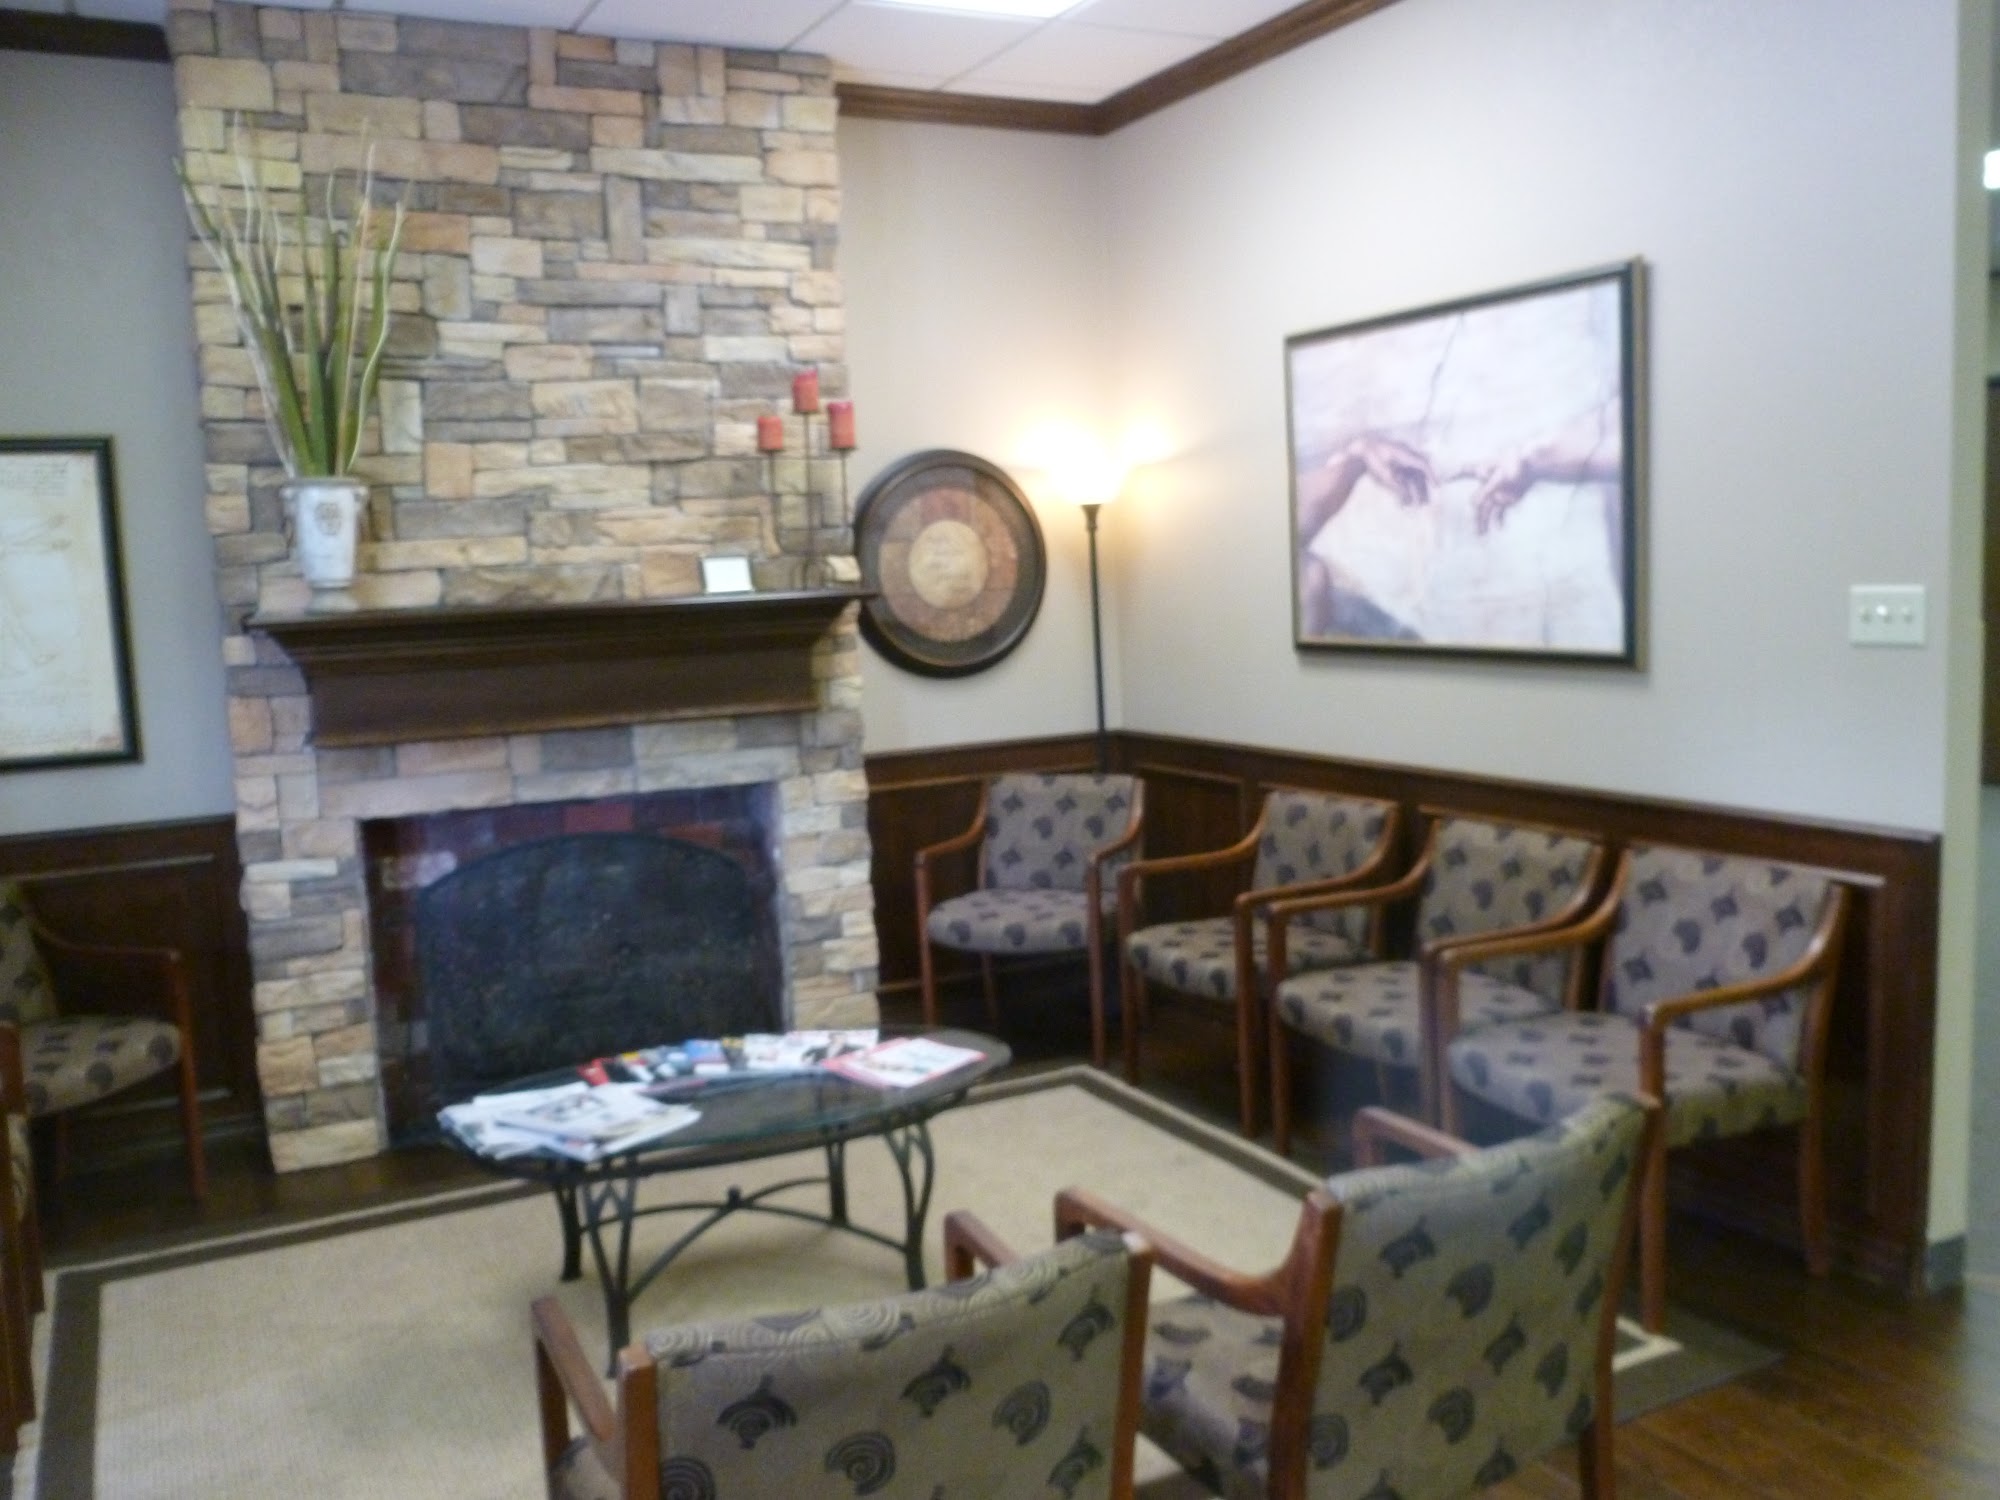 Back & Neck Care Center - Chiropractor in Bedford TX